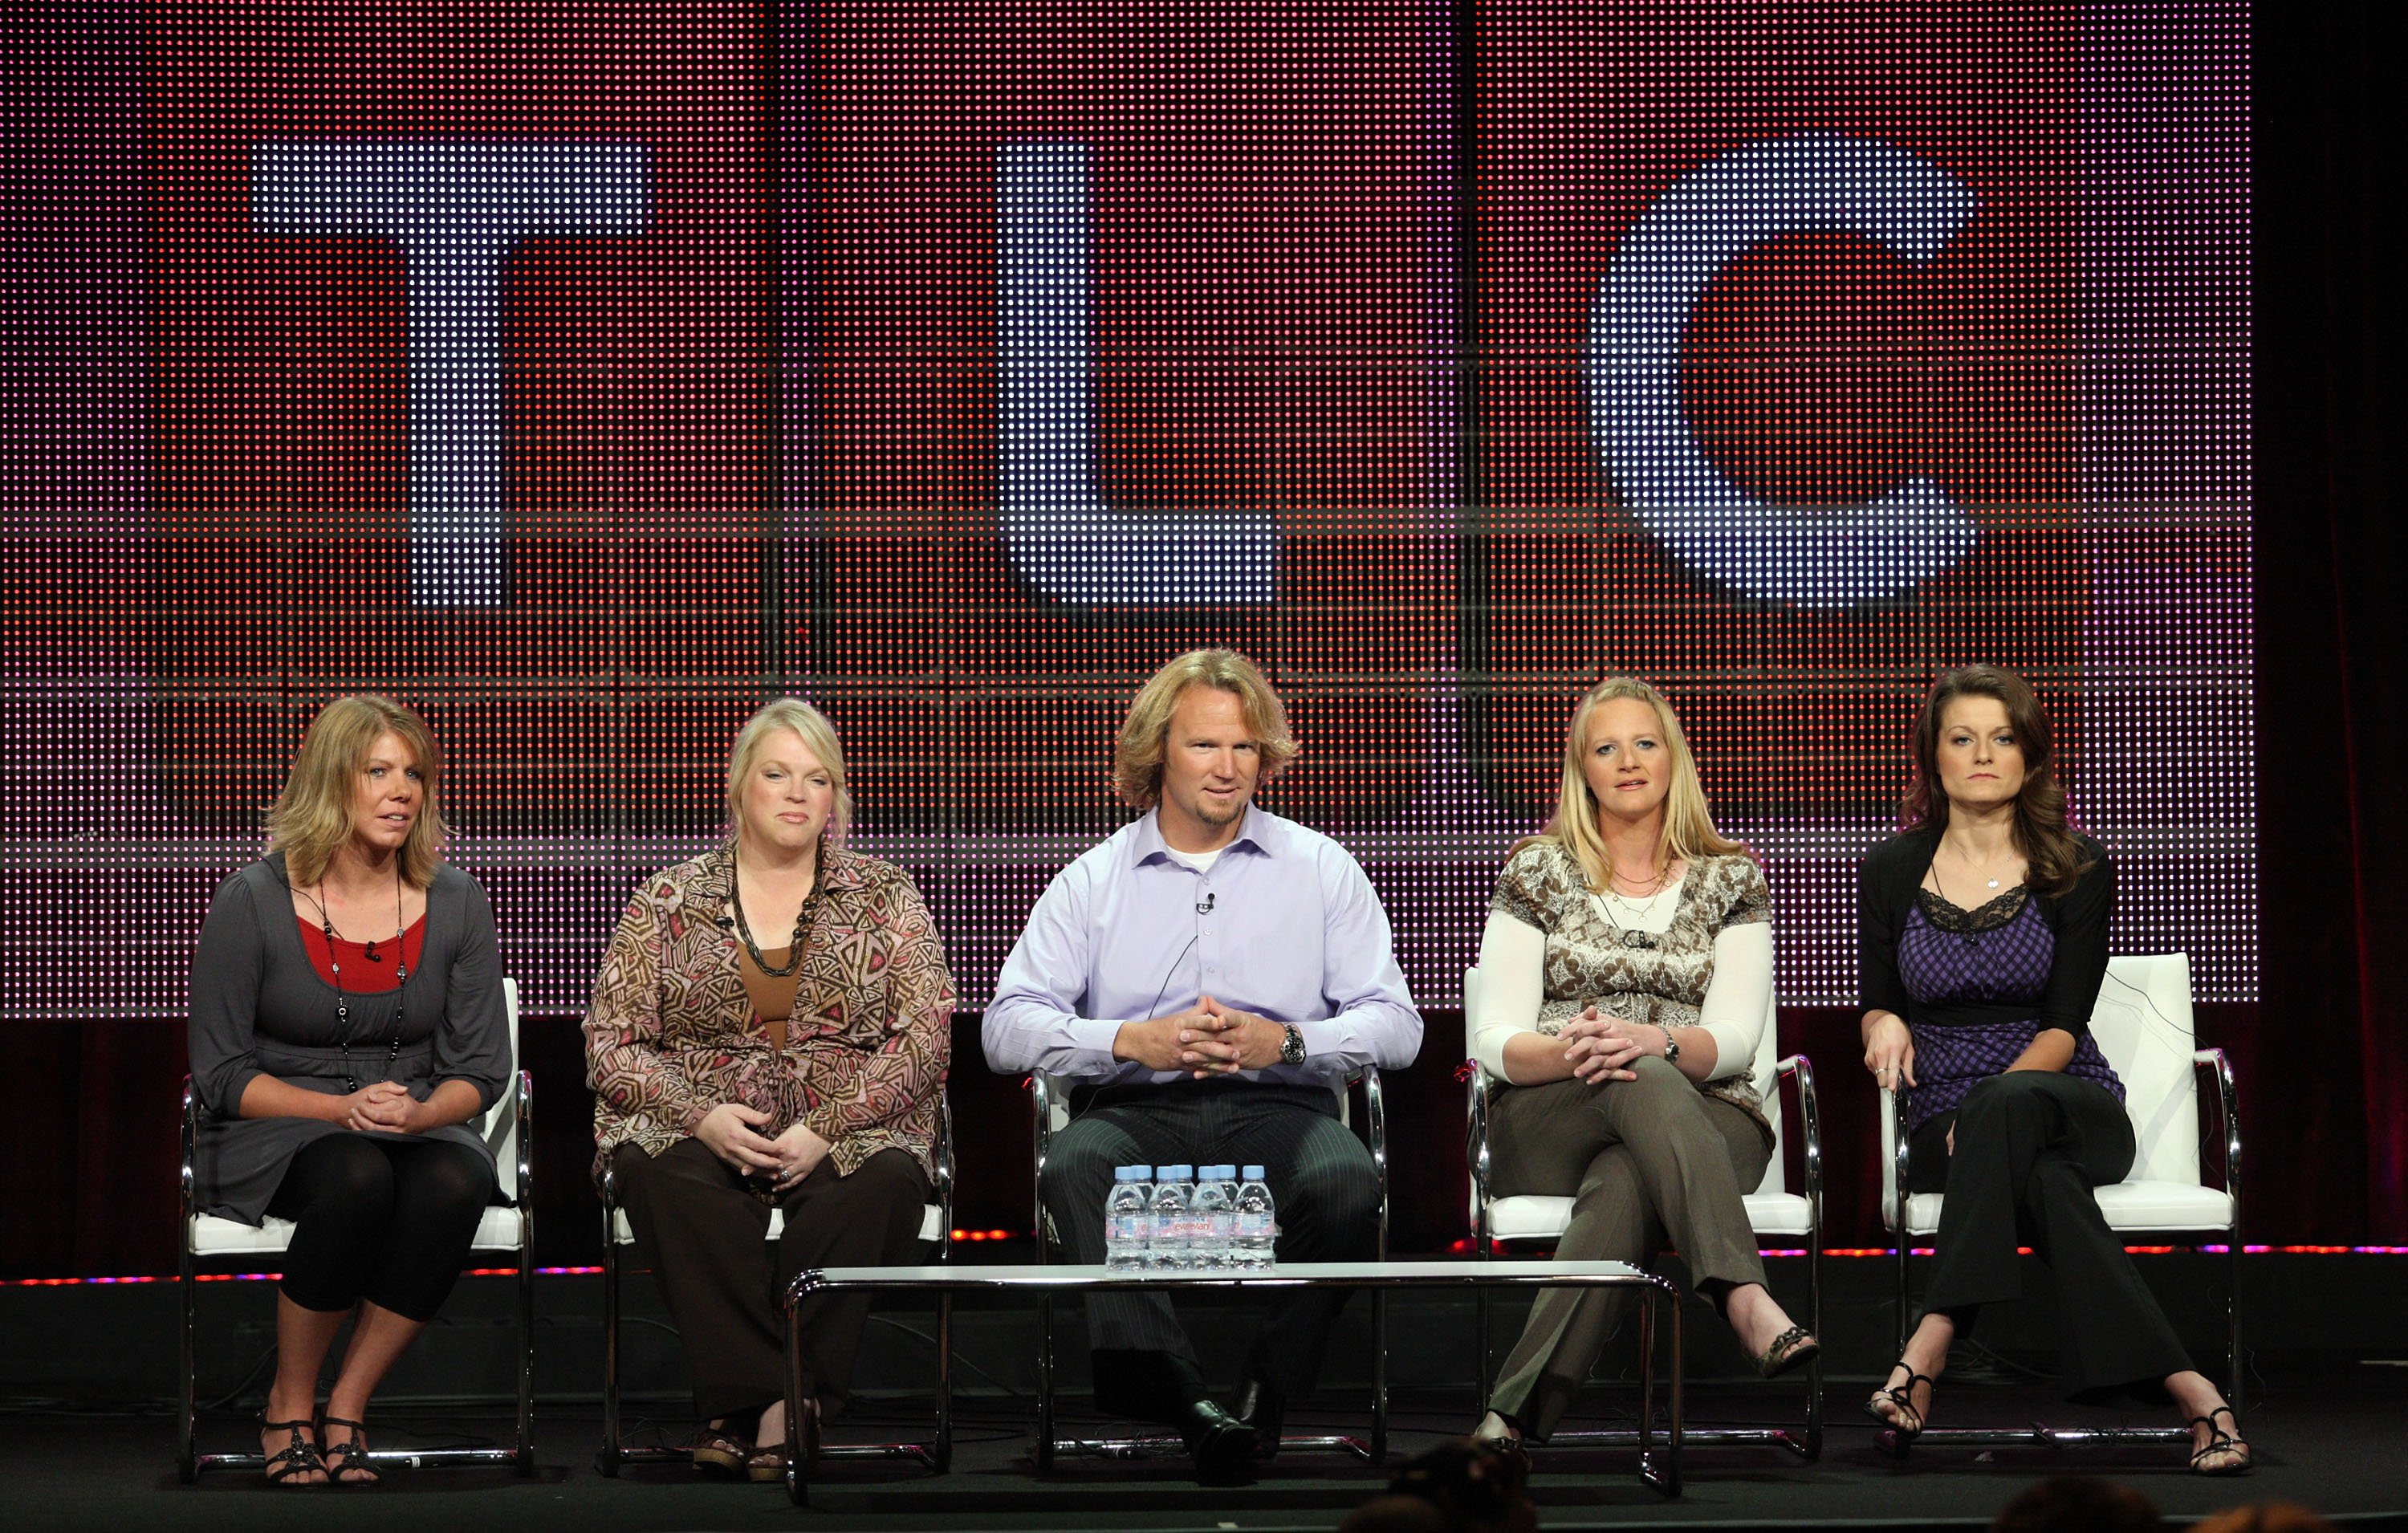 MerI Brown, Janelle Brown, Kody Brown, Christine Brown and Robyn Brown appear during the 2010 Summer TCA Tour